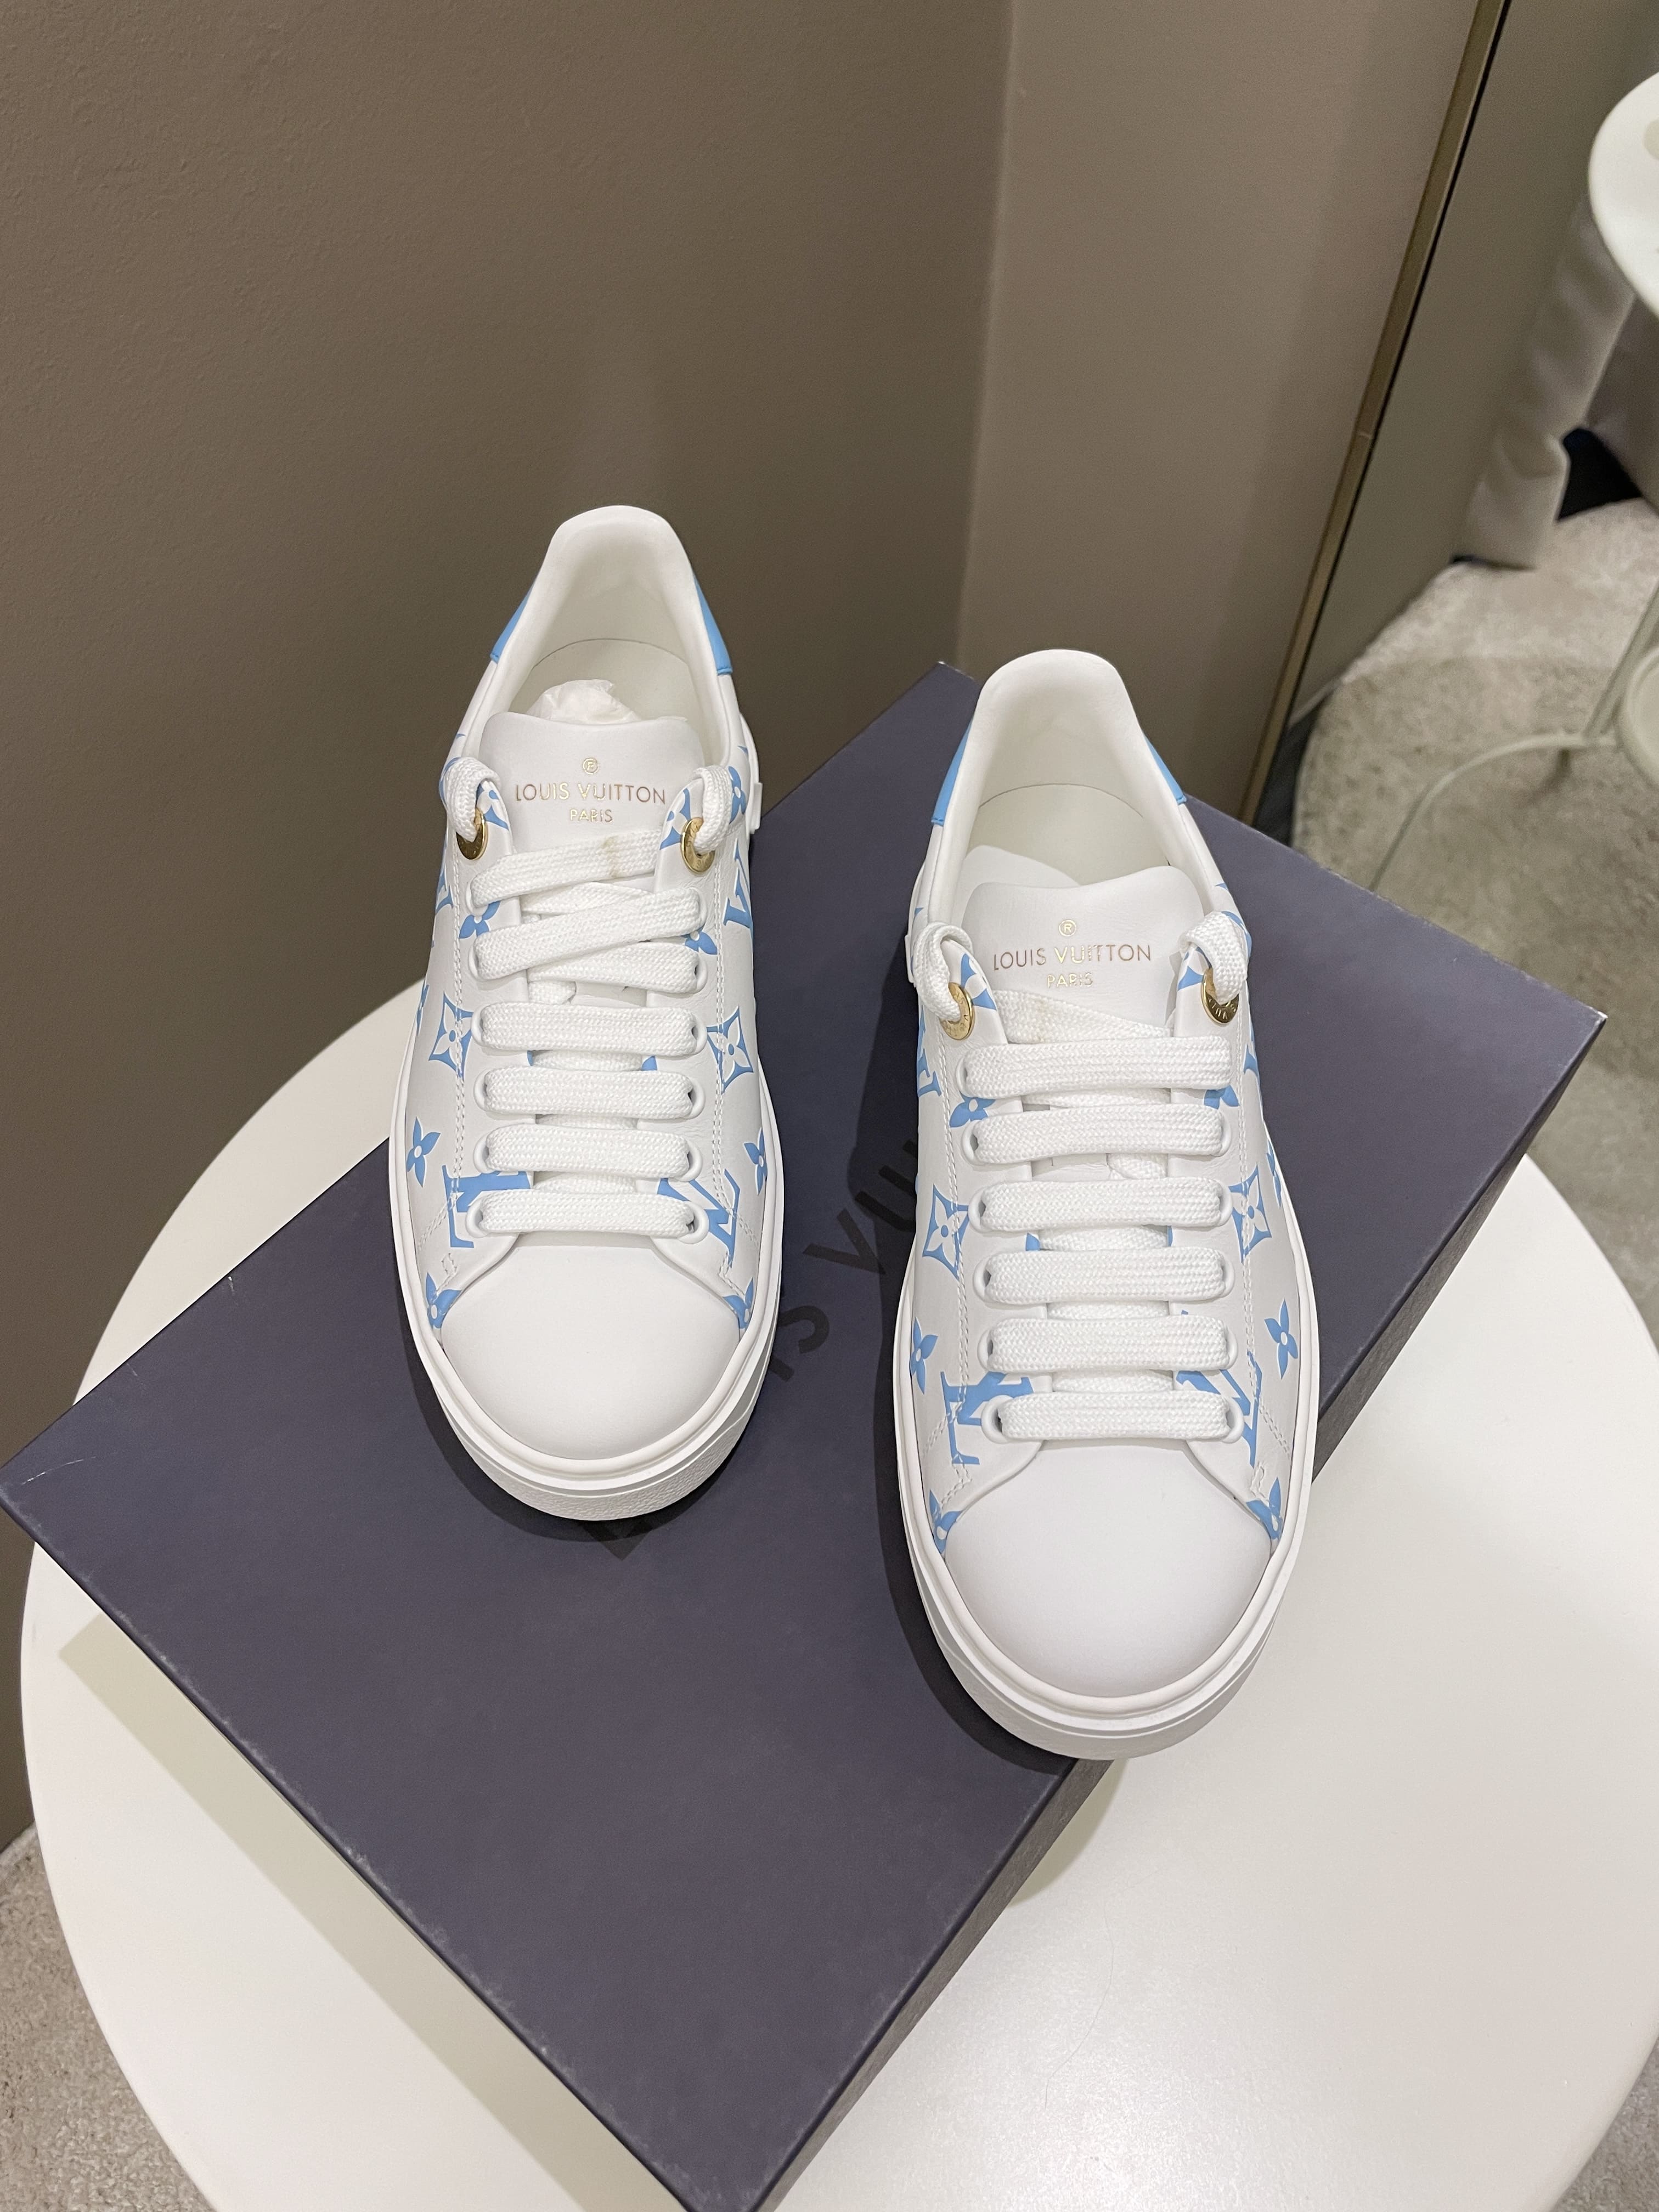 louis vuitton time out sneakers white